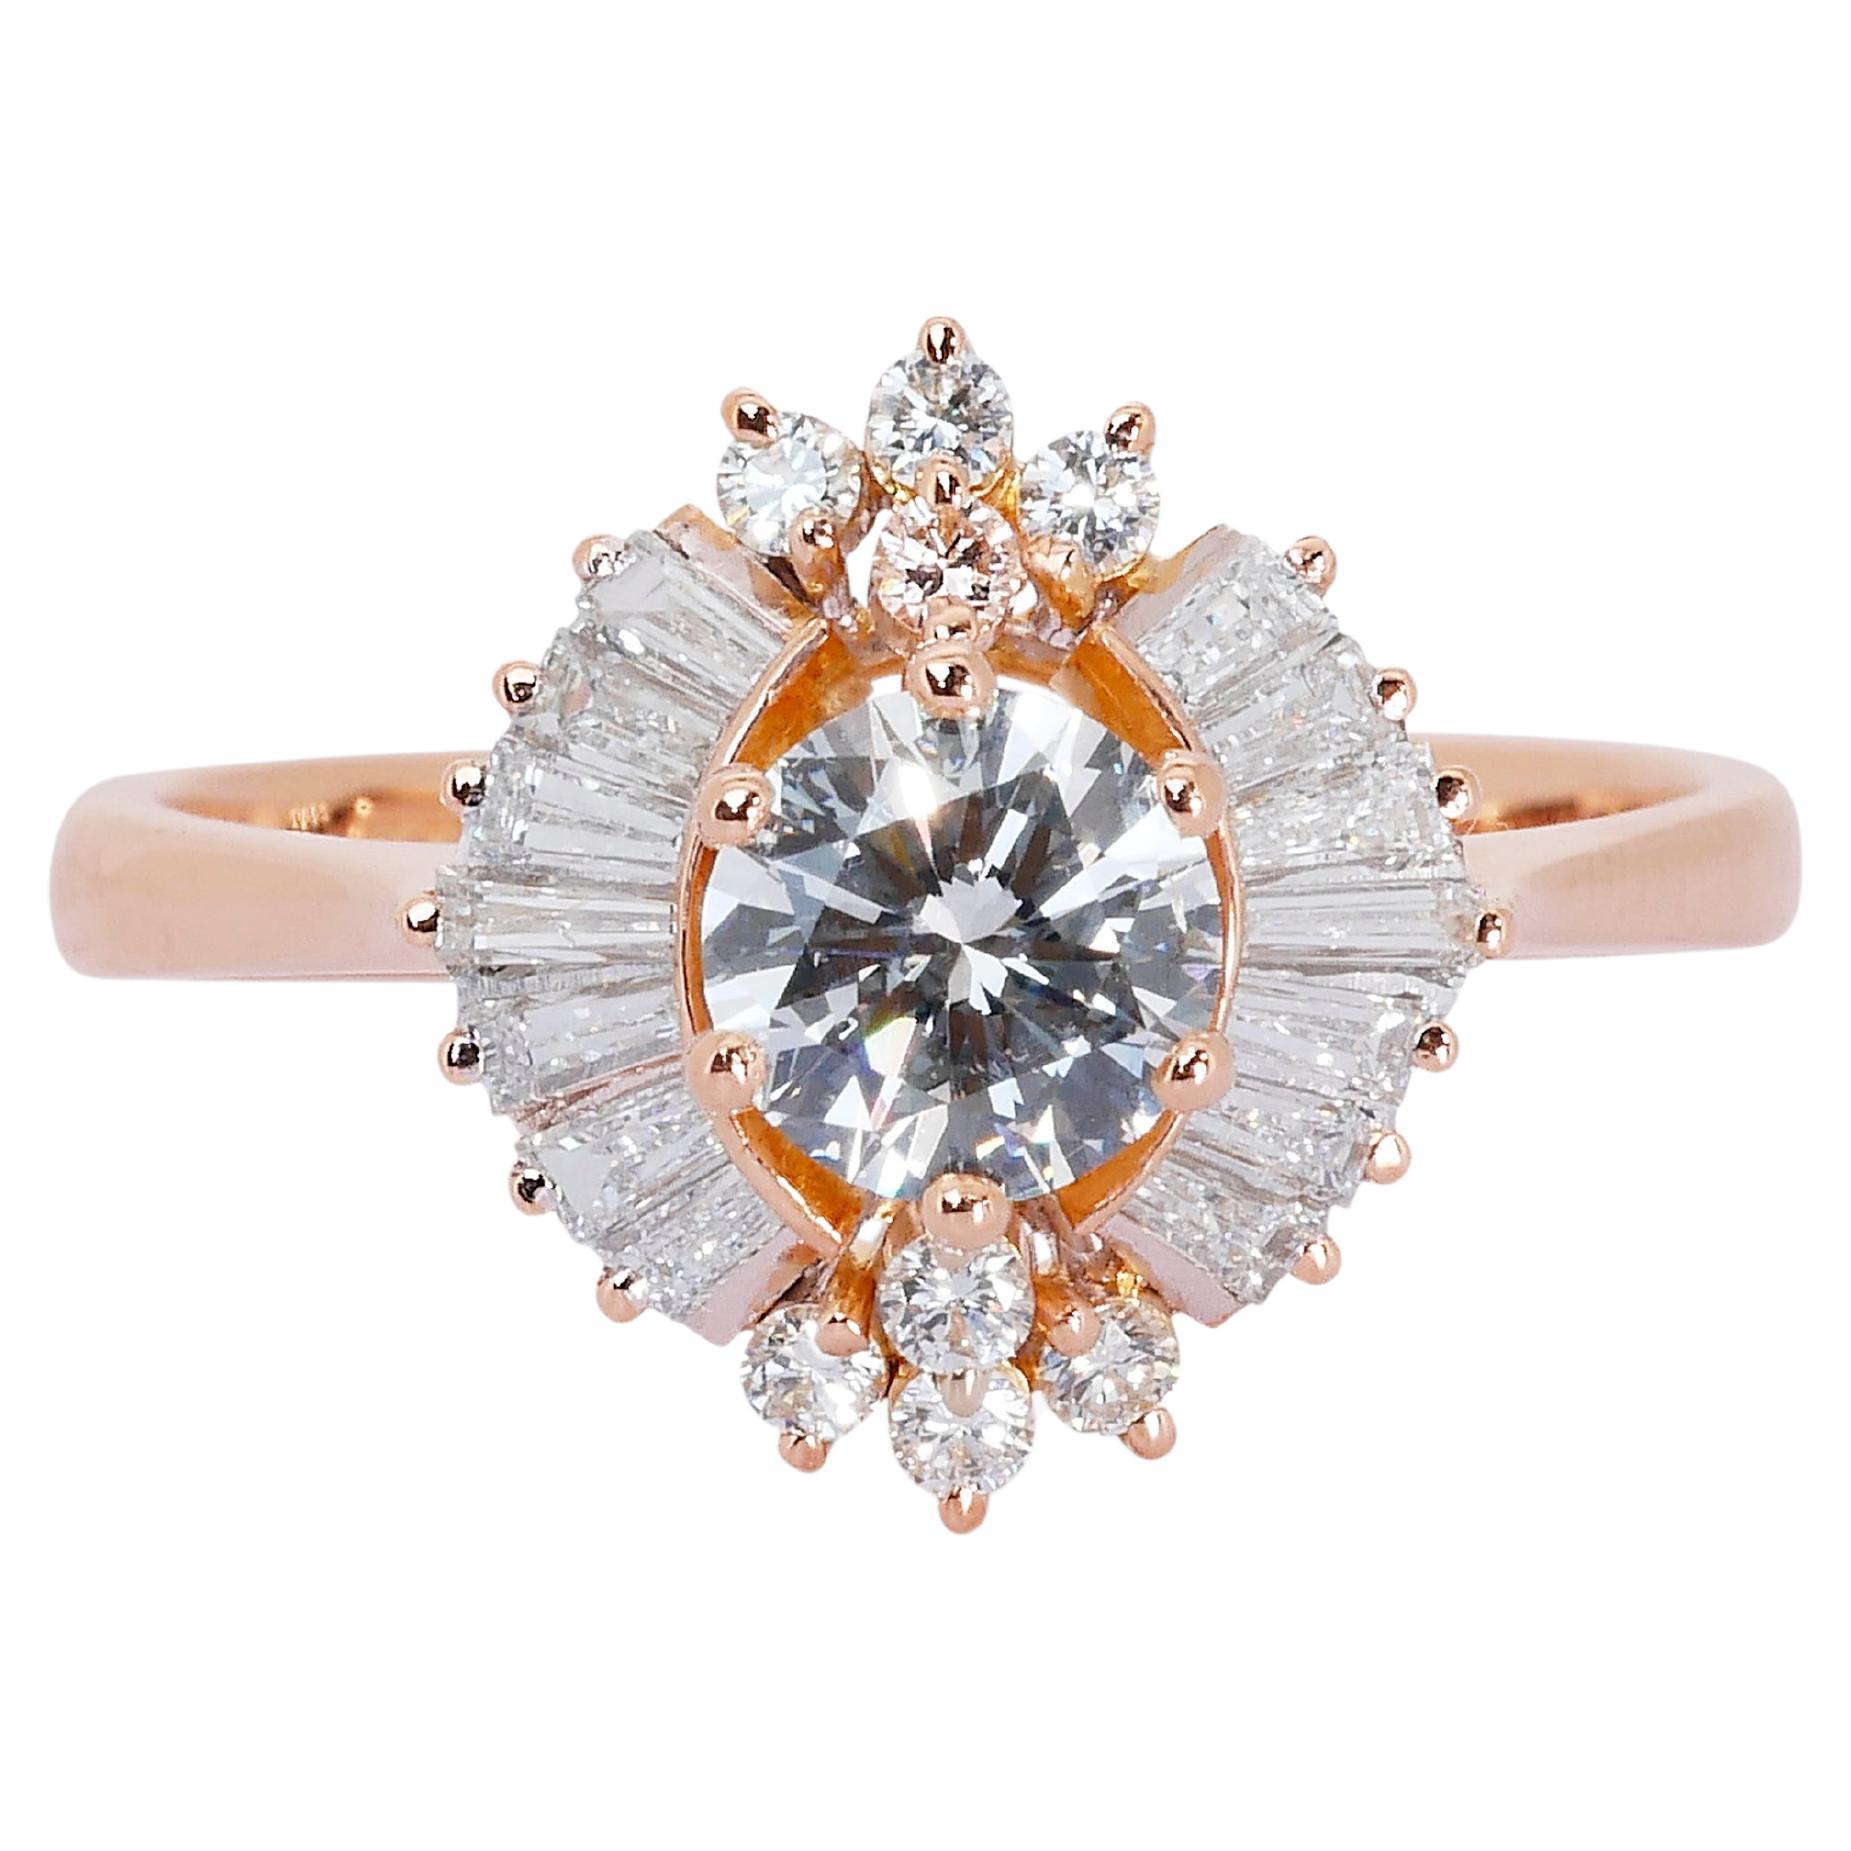 Marvelous 14k Rose Gold Ring w/ 1.46 Carat Natural Diamonds GIA Certificate For Sale